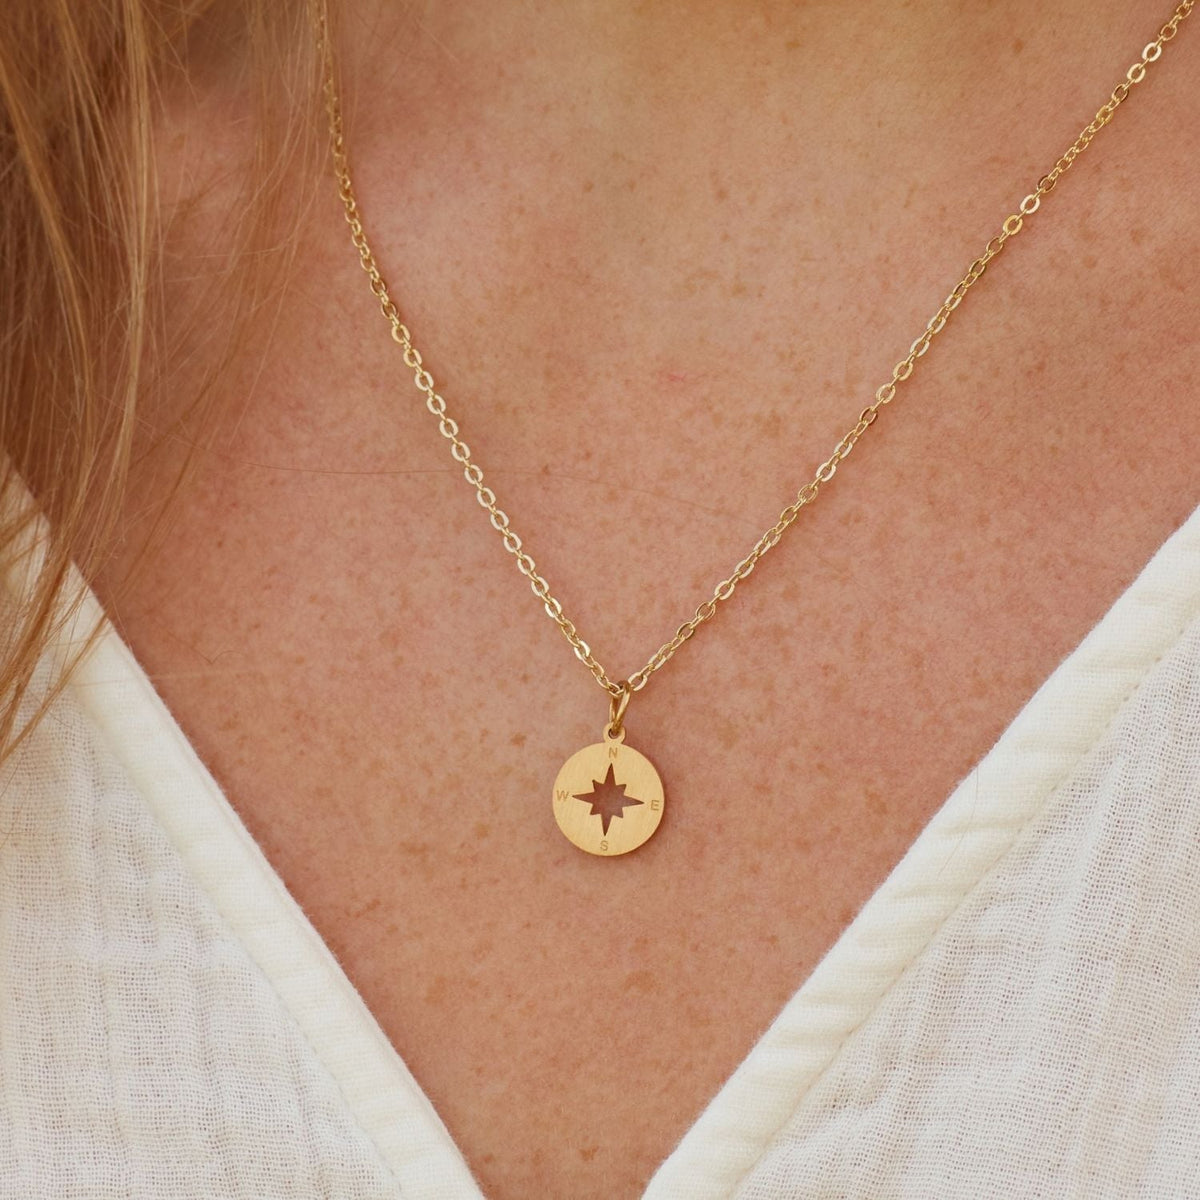 To the Mother of the Bride (From Daughter) | Today a Bride, Tomorrow a Wife | Compass Necklace